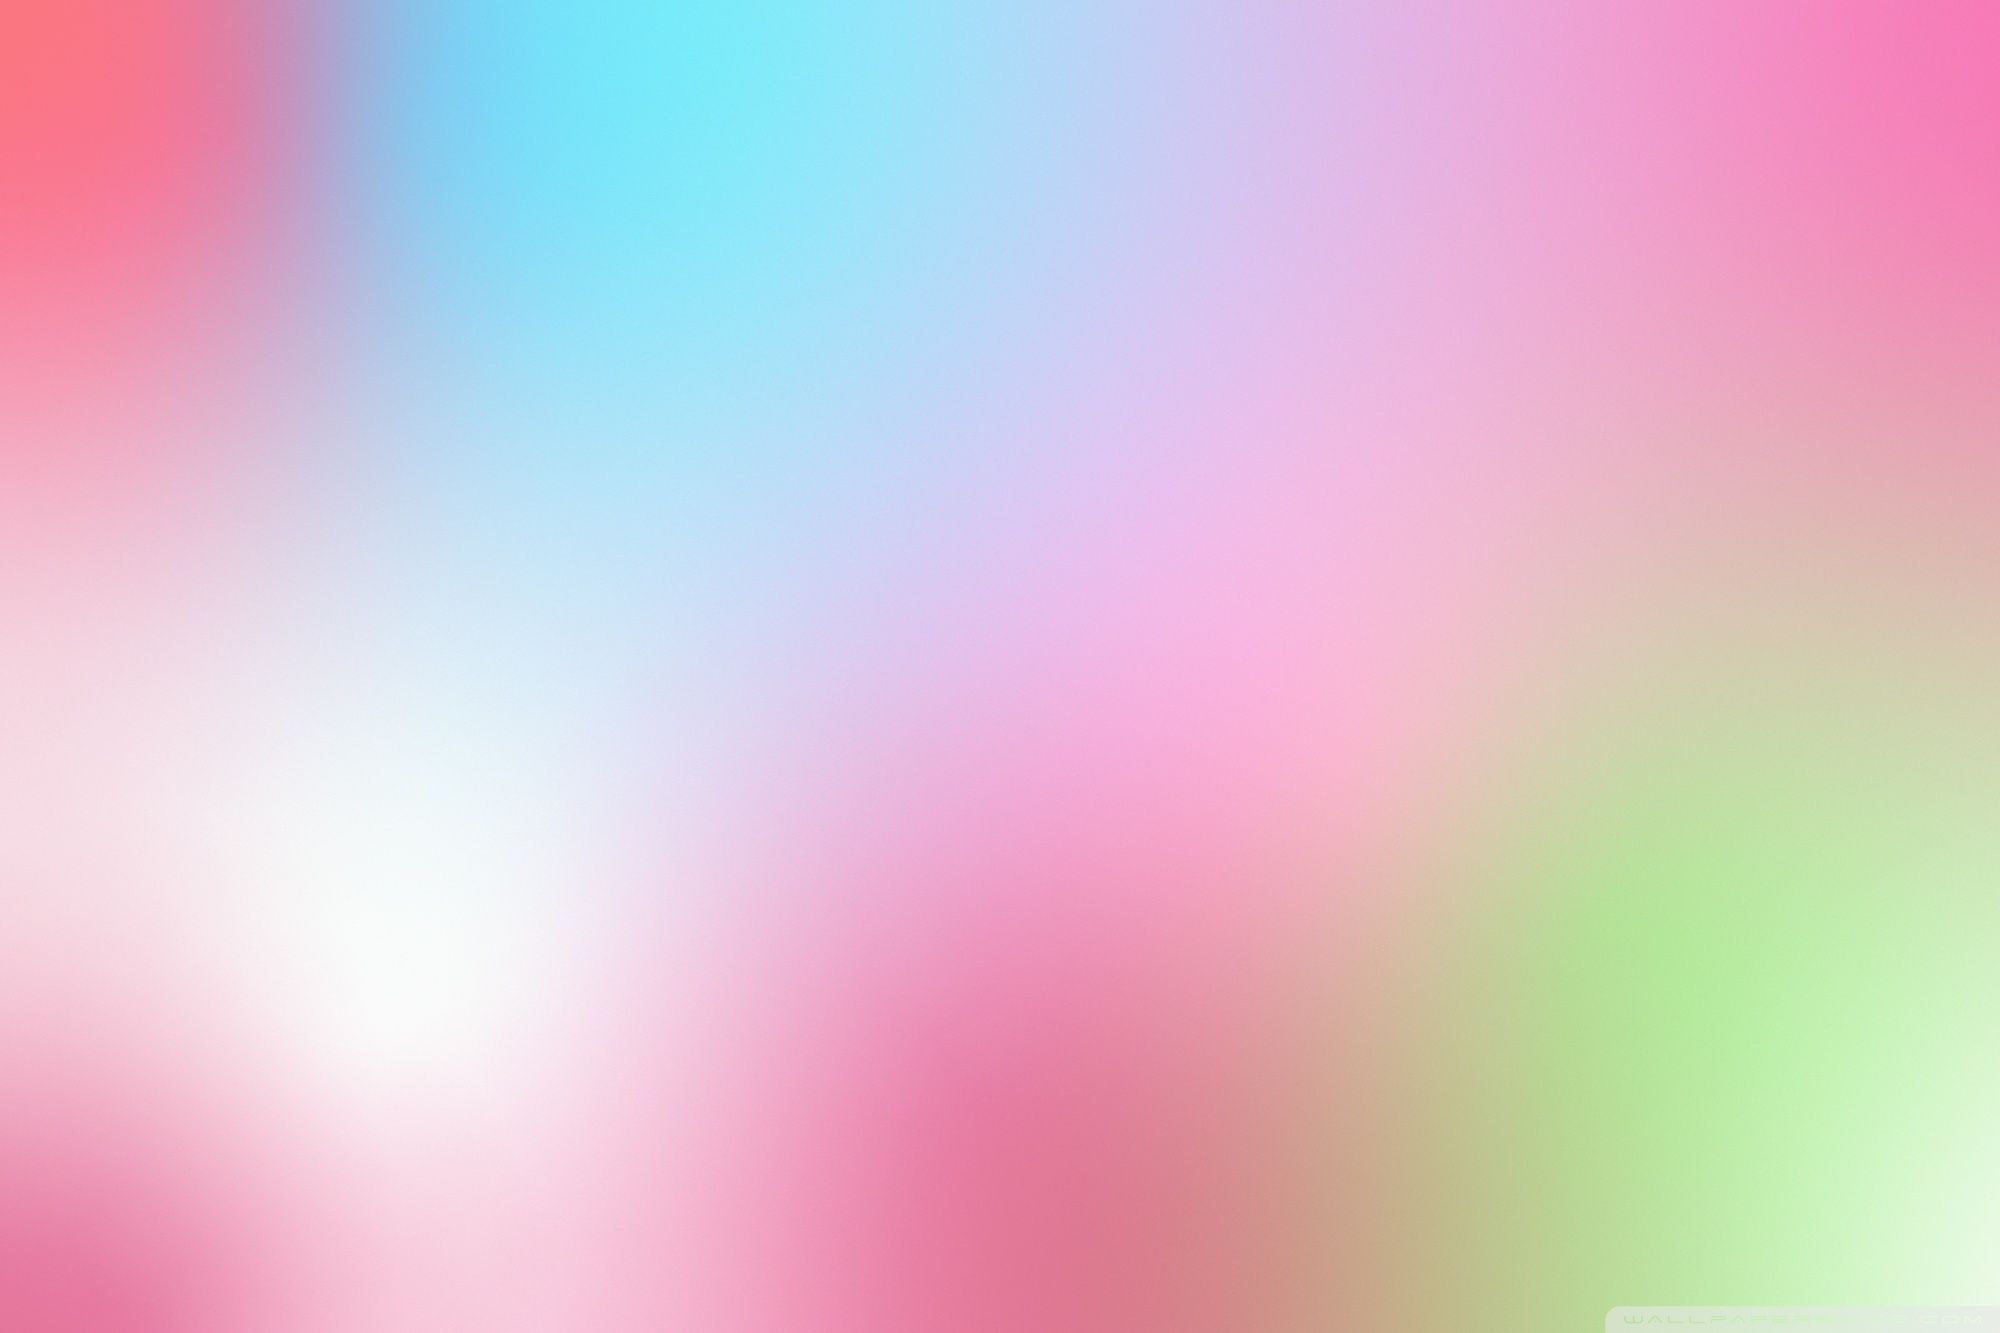 1920x1200 wallpaper with abstract blurred colors - Blurry